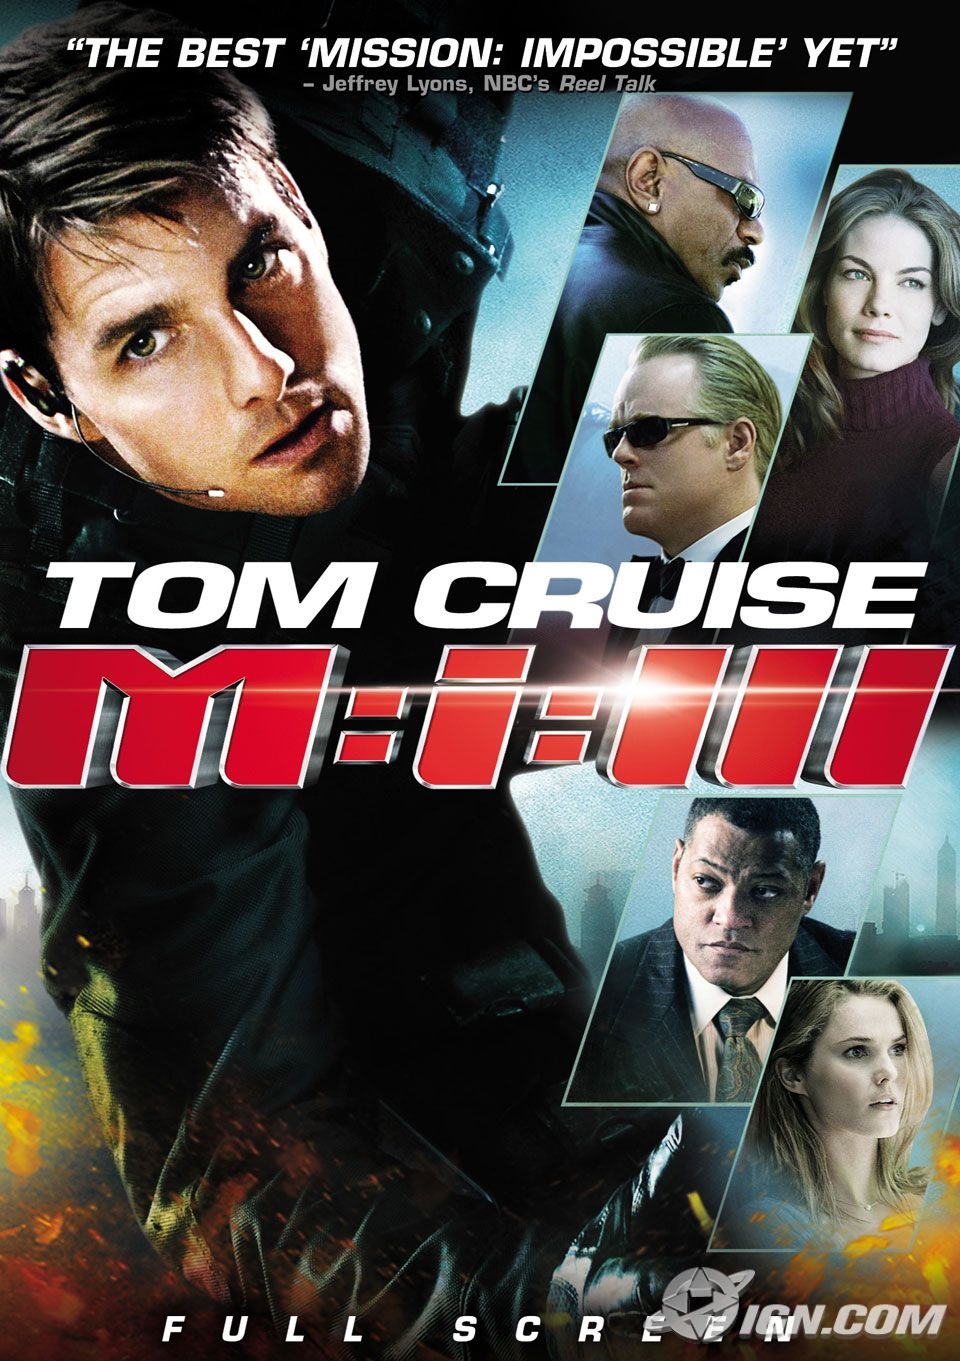 MISSION IMPOSSIBLE FULL MOVIE HINDI DUBBED TORRENT DOWNLOAD